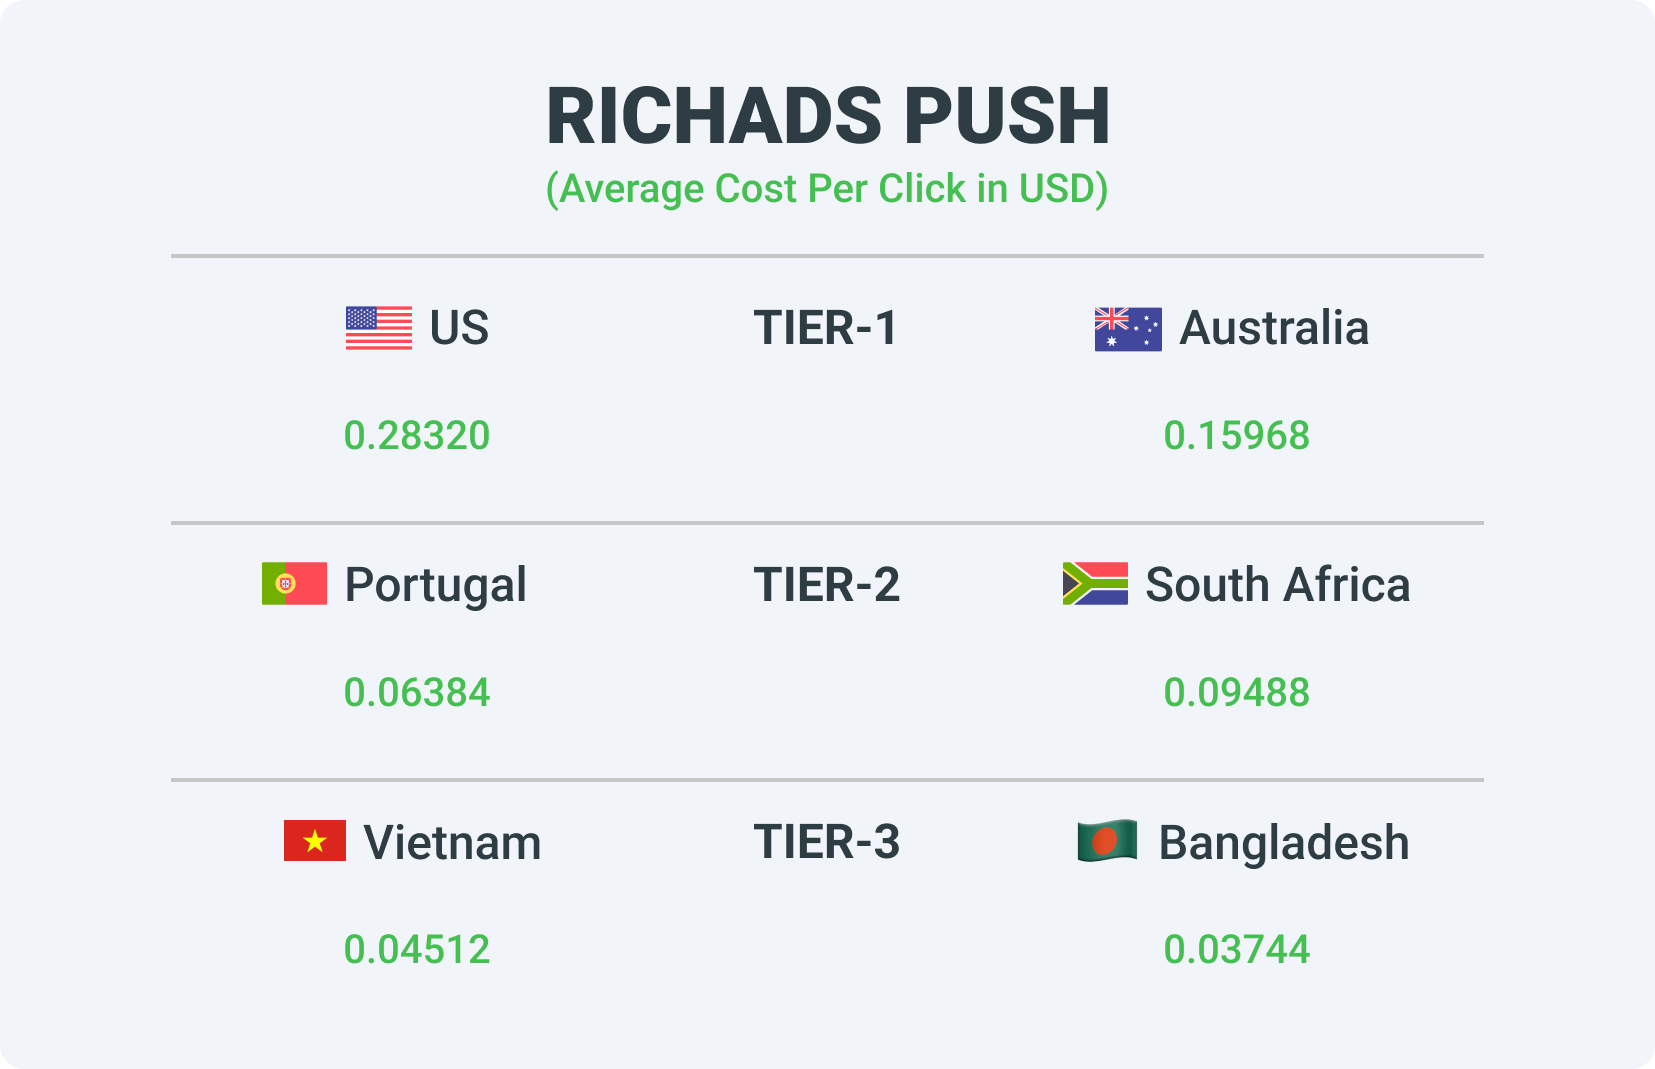 Rates for different tiers in the RichAds Push ad network